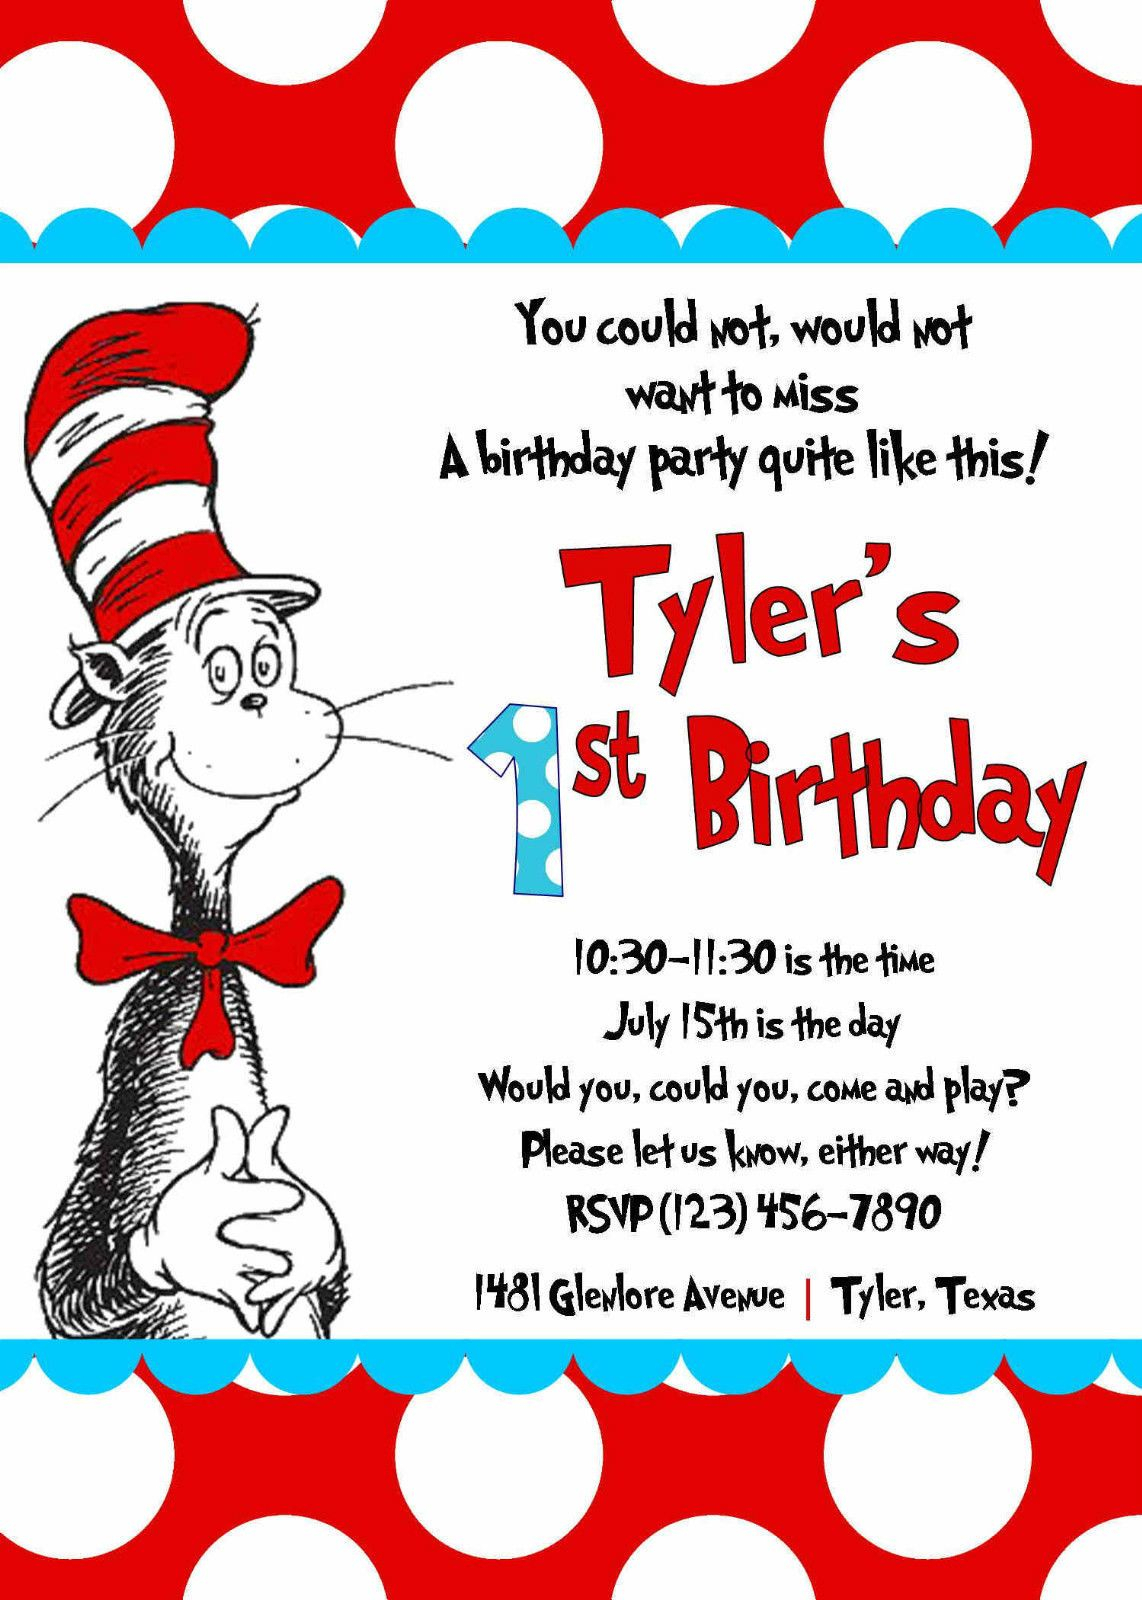 Details About Cat In The Hat Invitations, Kids Birthday Pertaining To Dr Seuss Birthday Card Template